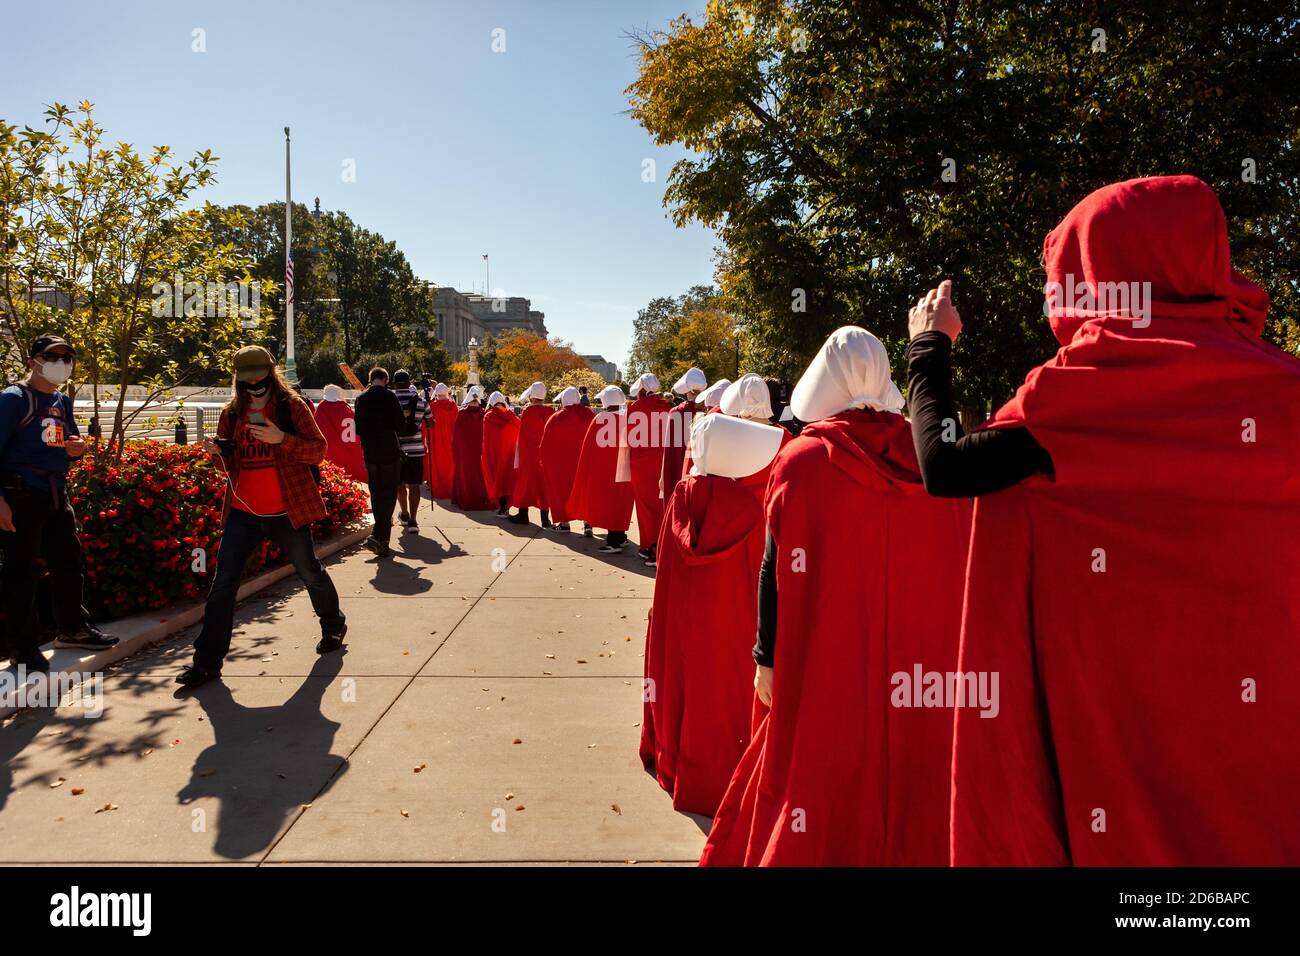 Washington, DC, USA, 15 October, 2020.  Pictured: Women and girls walk silently on the sidewalk in a single file line during the Handmaids Descend on the Supreme Court protest held by Refuse Fascism DC.  For the event, women dressed as handmaids in red capes from The Handmaid's Tale and stood in front of the Supreme Court building to protest the nomination of Amy Coney Barrett and fascist policies of the Trump Administration.  The protest continued Refuse Fascism's demand for immediate removal of Donald Trump and Mike Pence from office.  Credit: Allison C Bailey/Alamy Live News Stock Photo